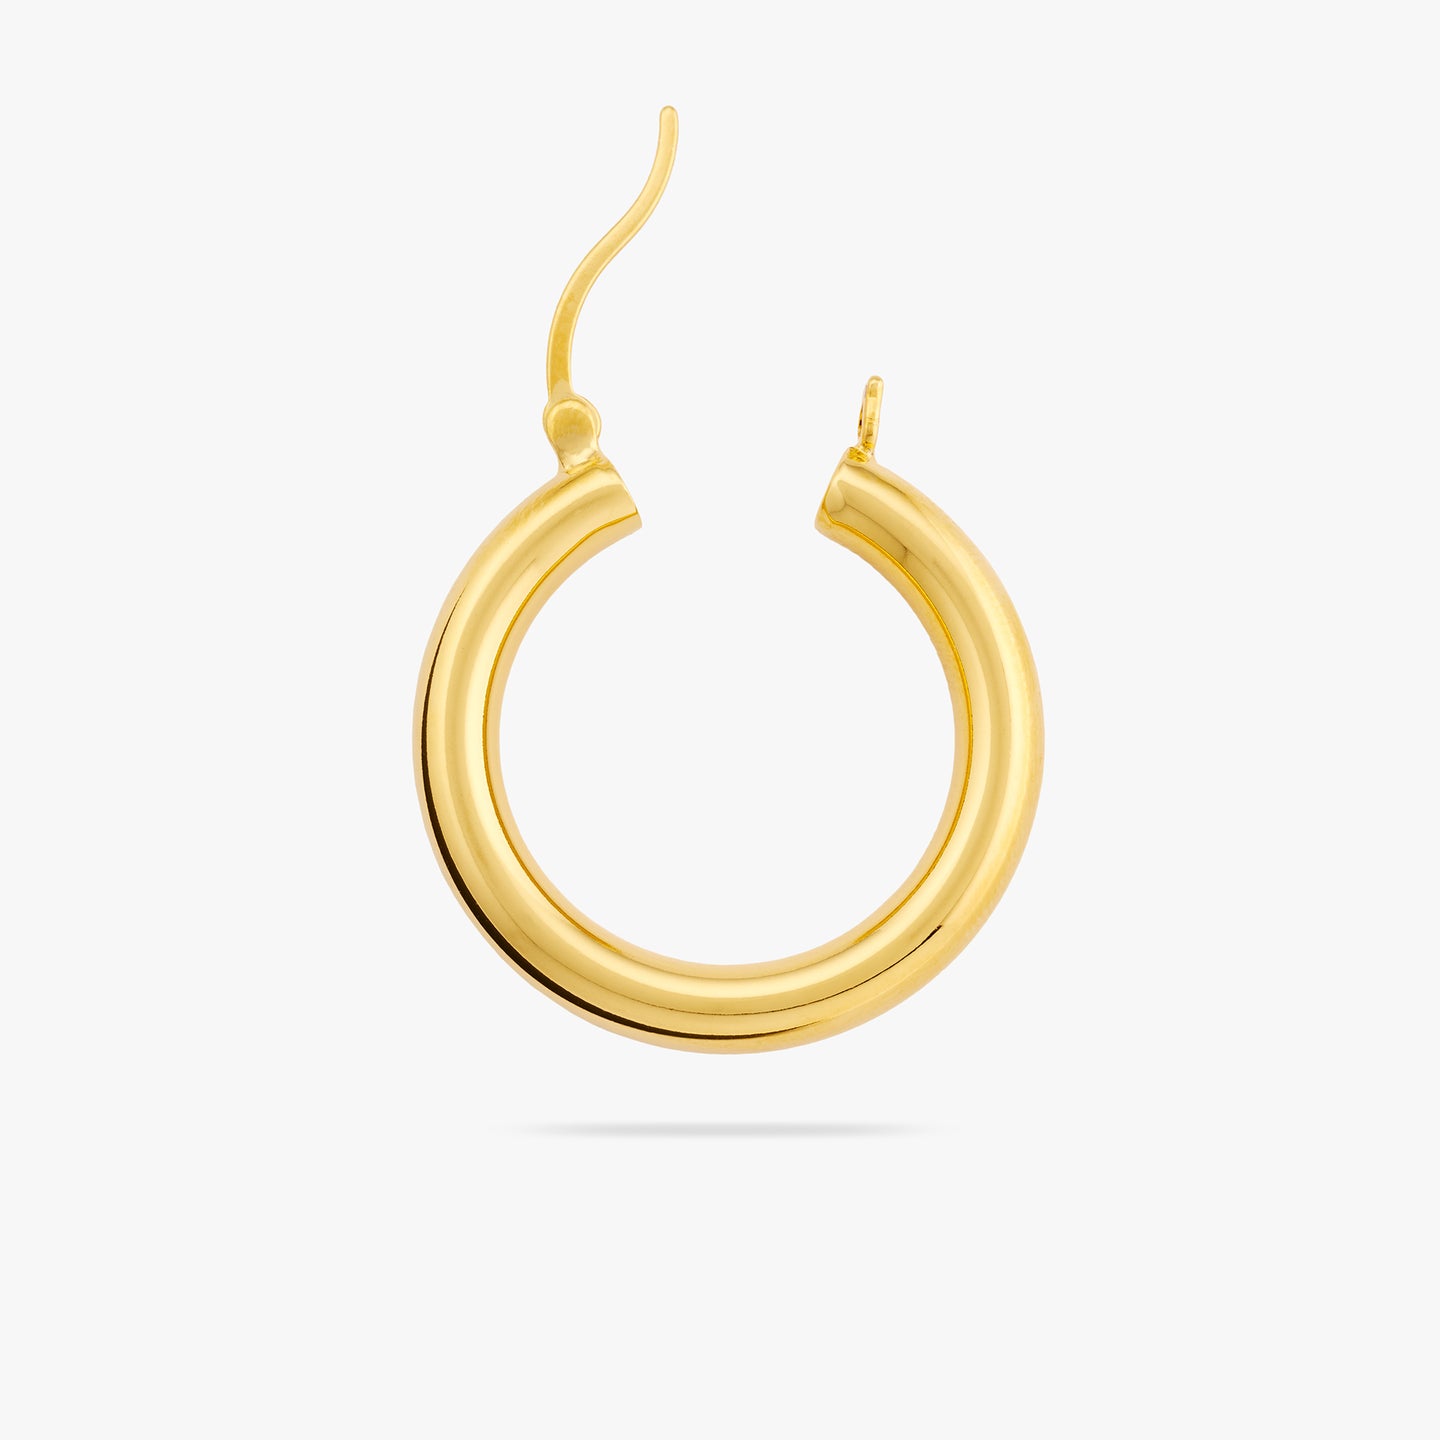 This is a large and thick gold hoop earring with the clasp undone color:null|gold